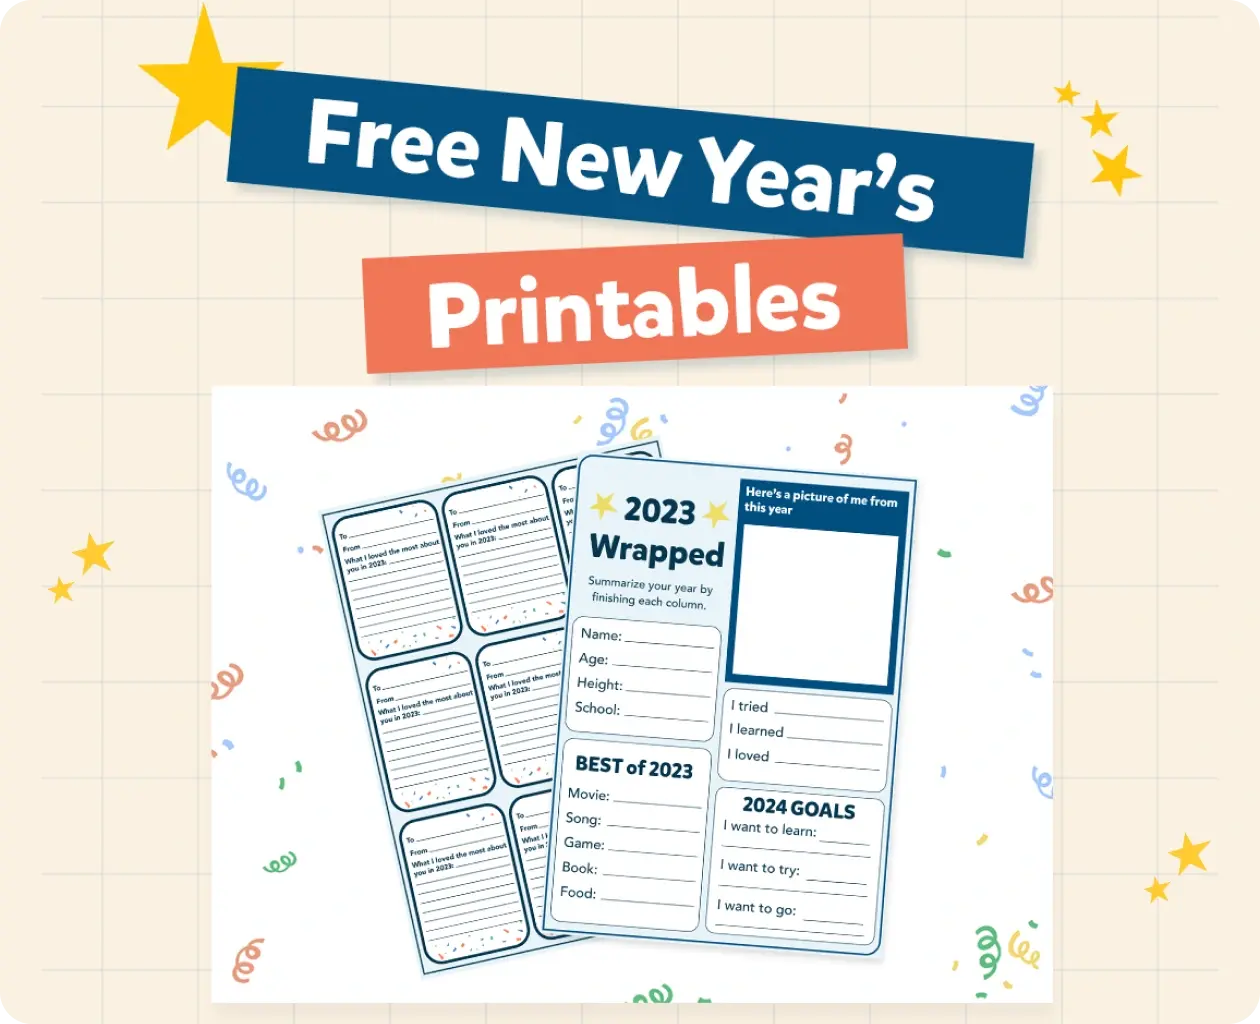 New Year Printable.webp__PID:9da2d0c5-c1b8-4a24-9bc2-df3afc7bf1a0